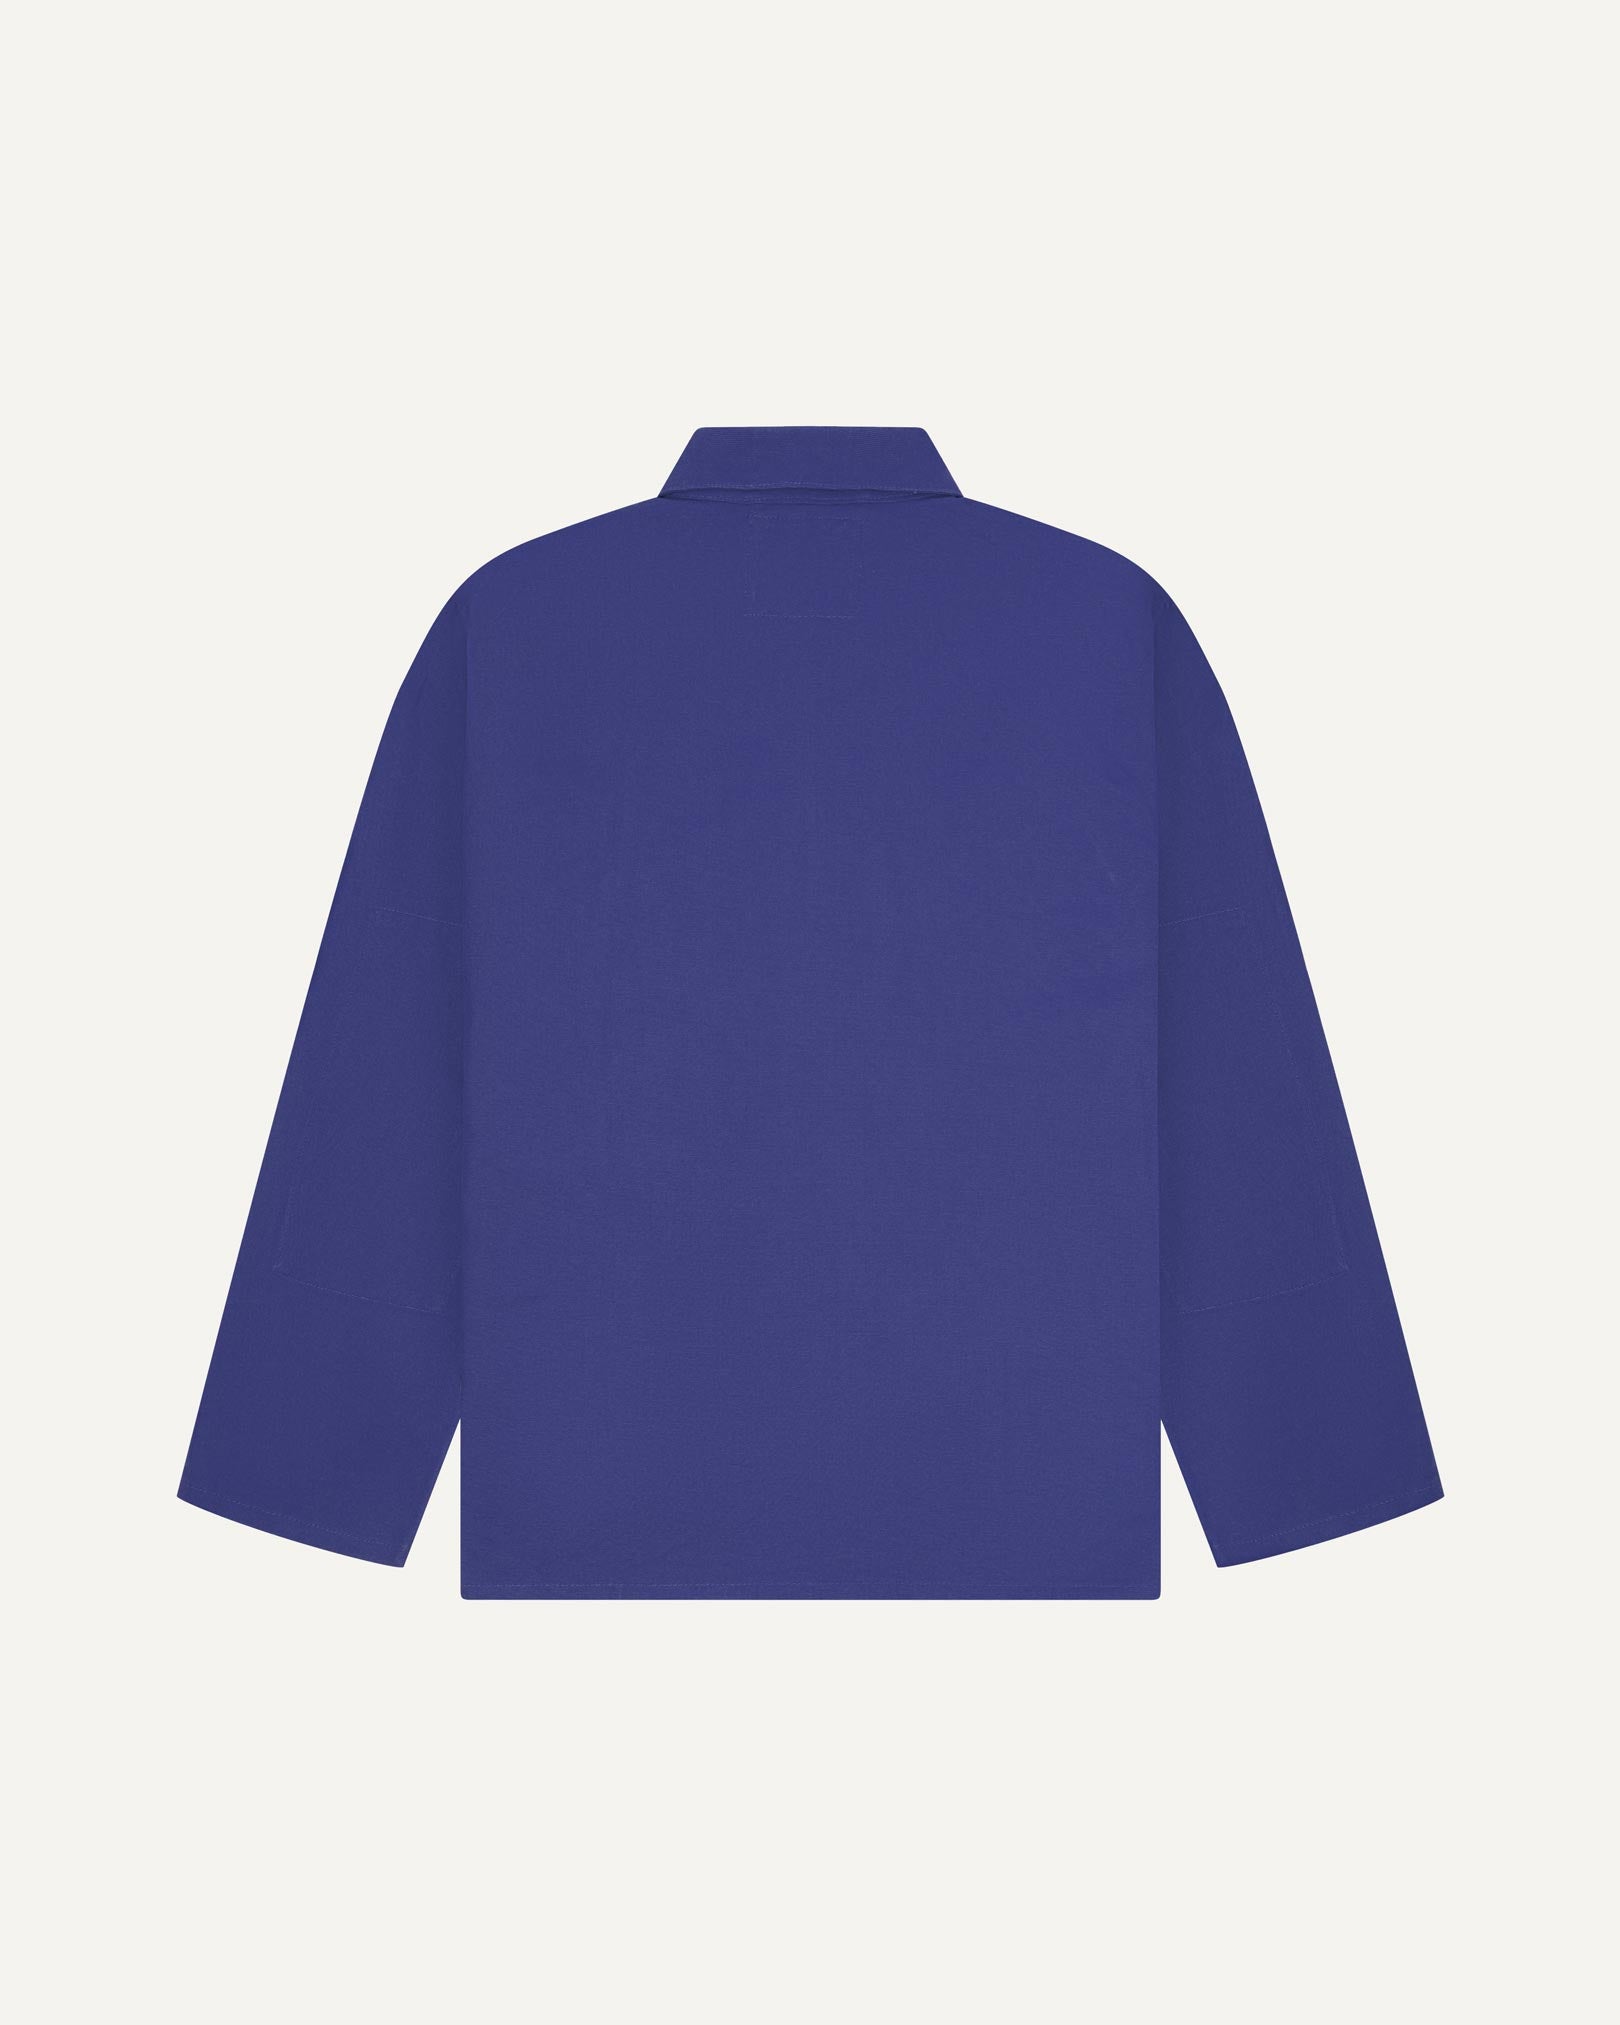 Back view of ultra blue, buttoned organic cotton overshirt with view of reinforced elbow area and boxy silhouette.